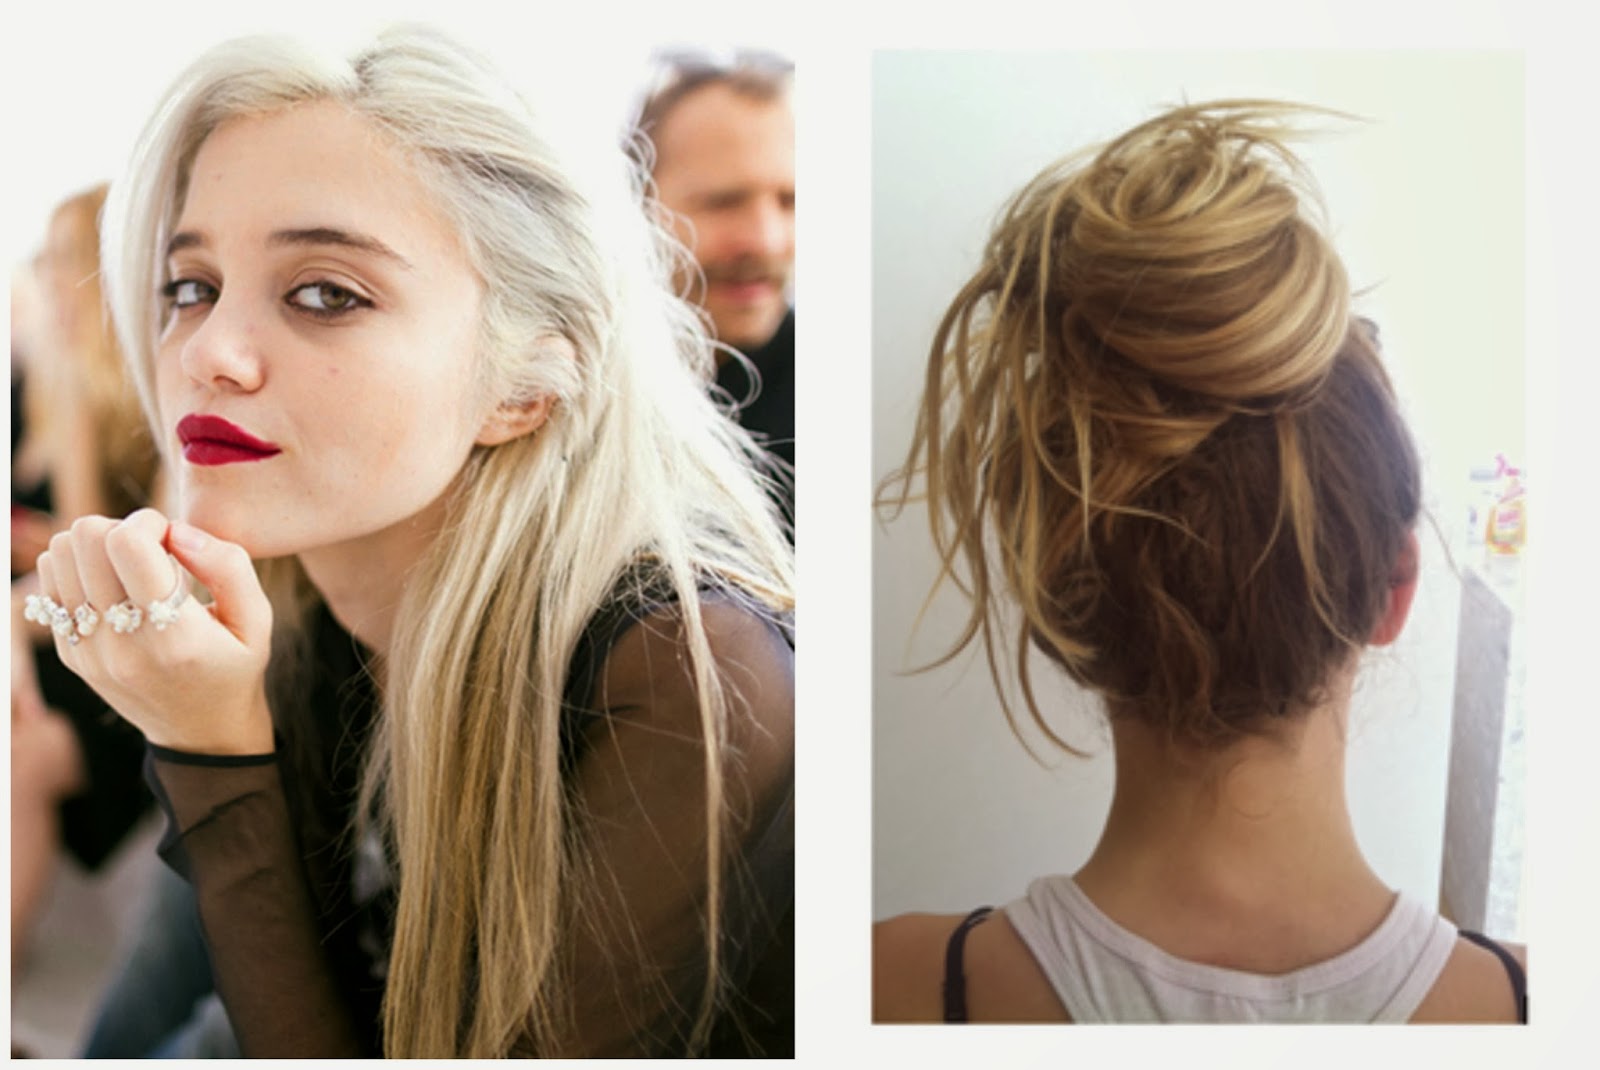 4. "Blonde Hair Inspiration: The Best Tumblr Blogs to Follow" - wide 5